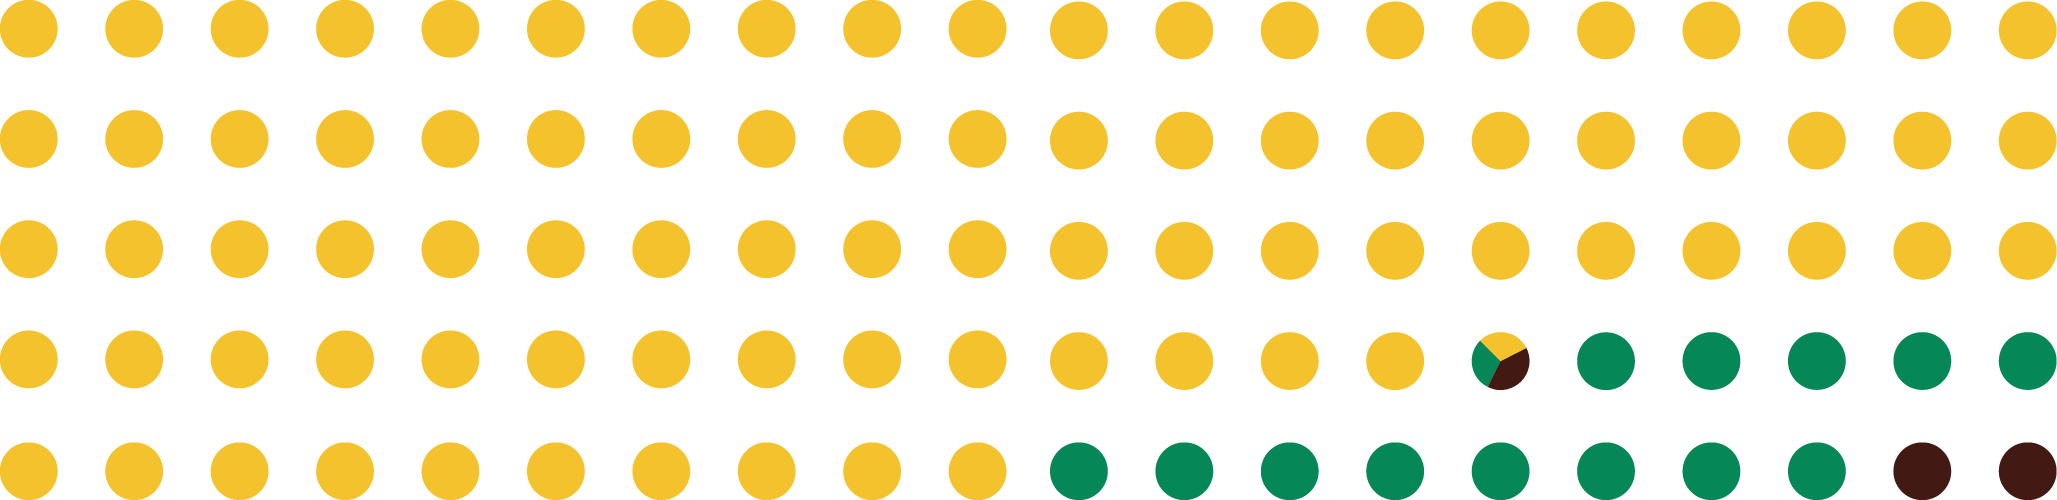 A grid of black, green and yellow circles